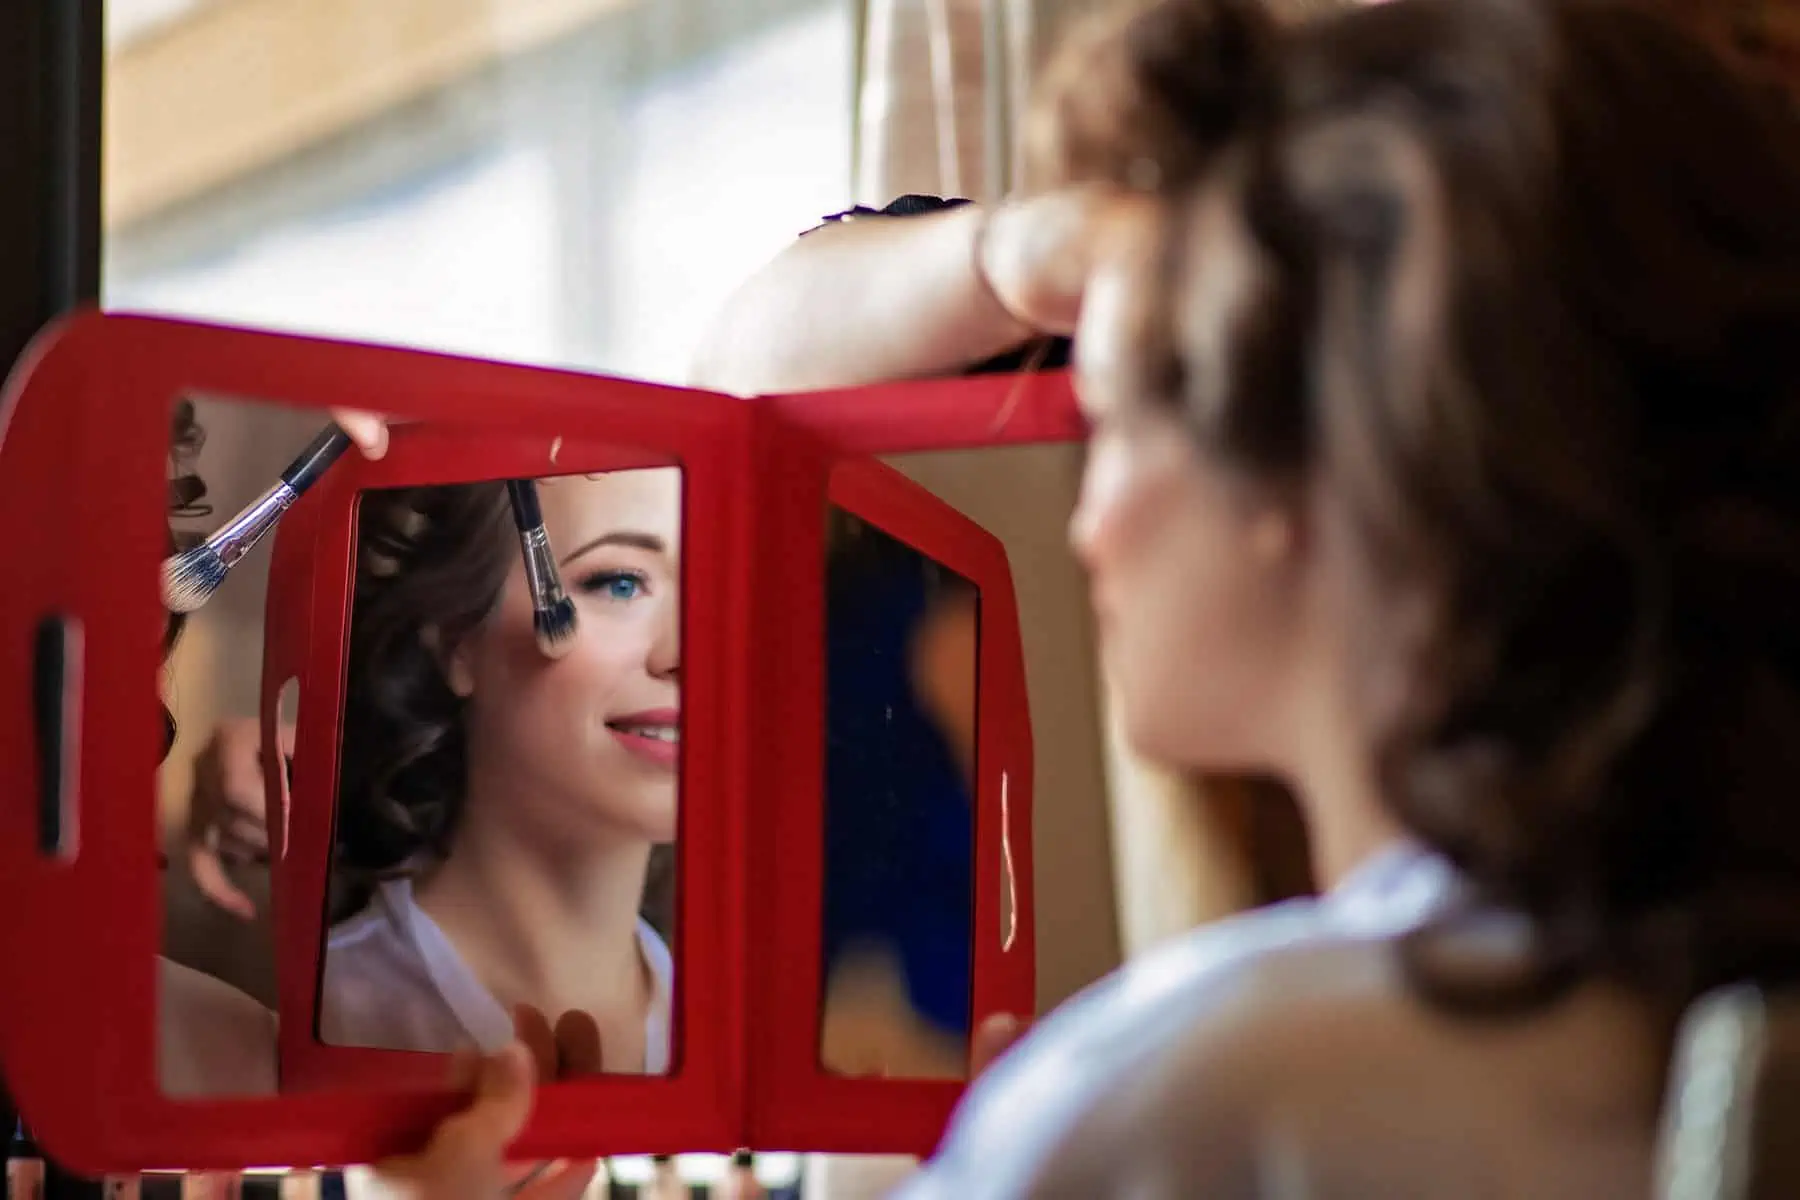 A woman is getting her makeup done in a red mirror.